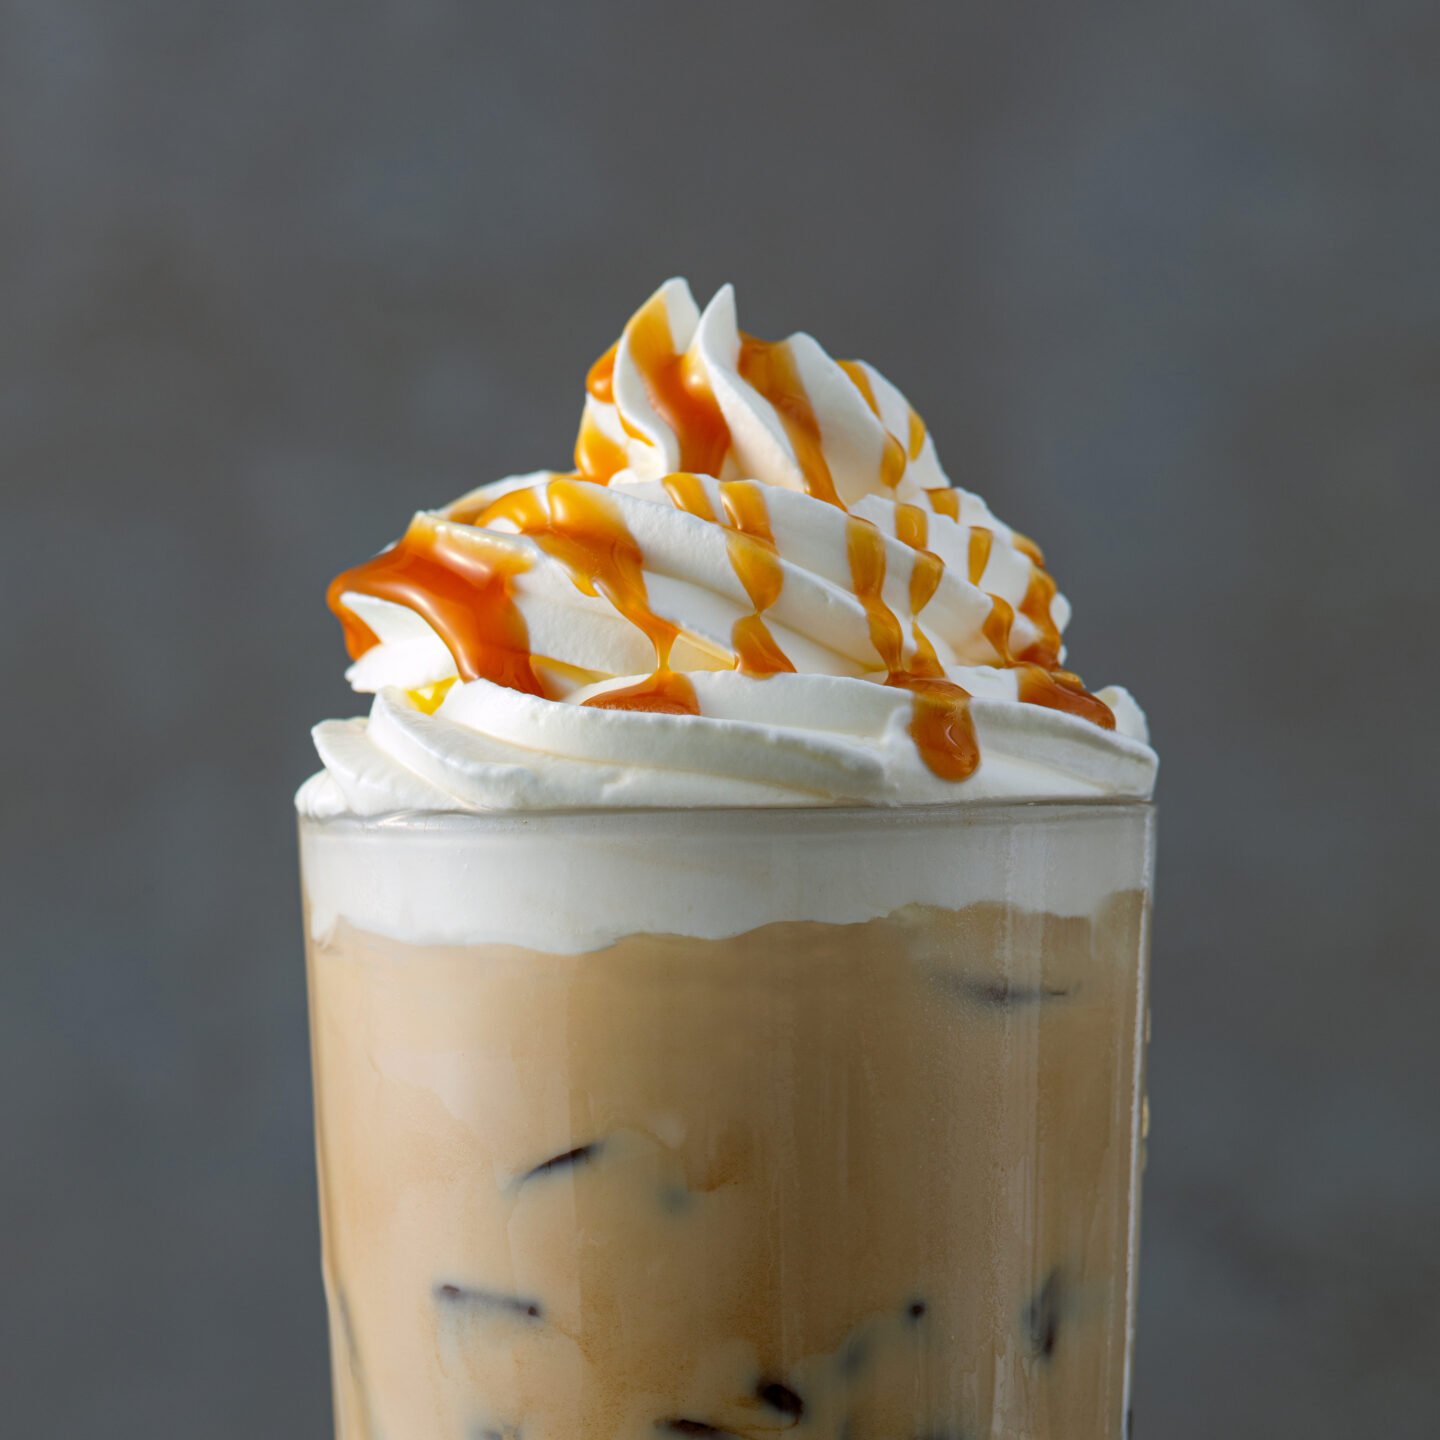 iced-coffee-latte-decorated-with-whipped-cream-and-caramel-sauce